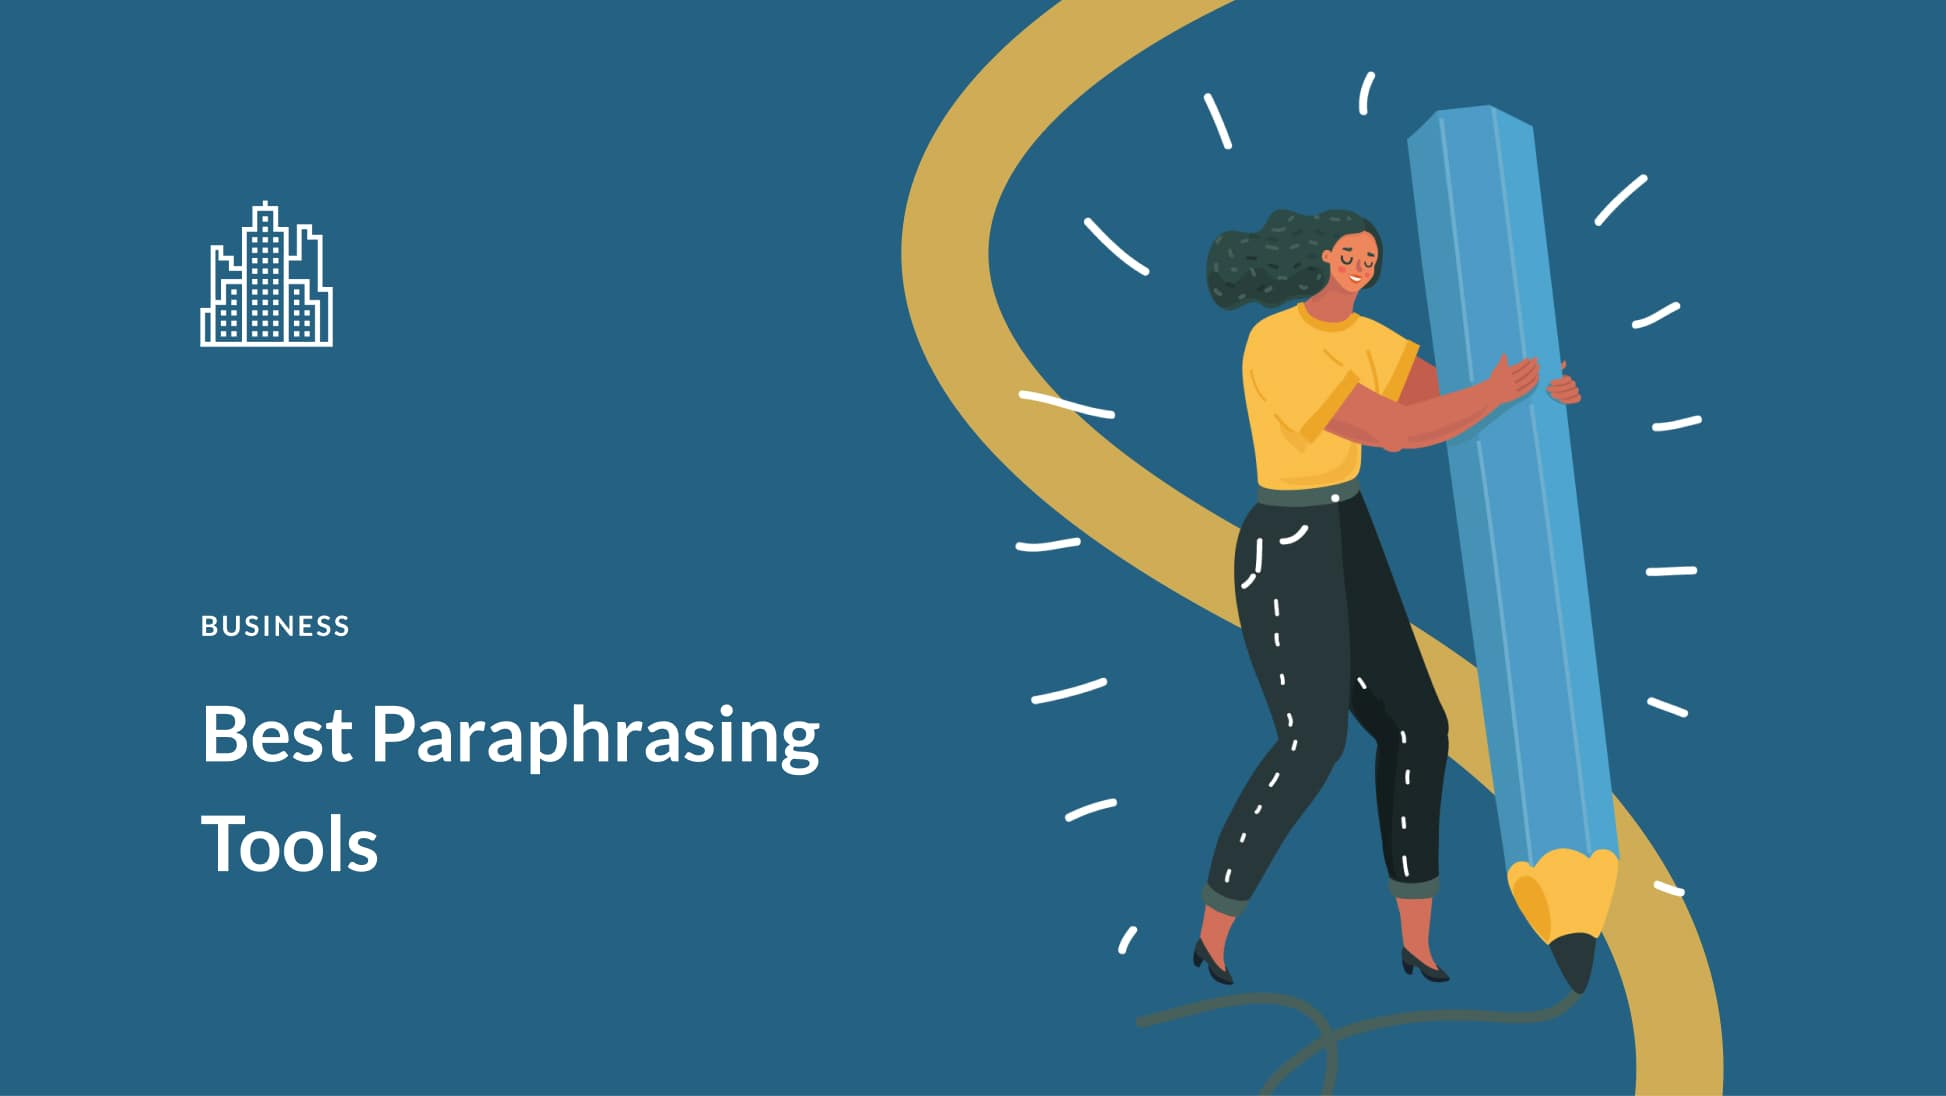 How To Use Paraphrasing Tools Effectively